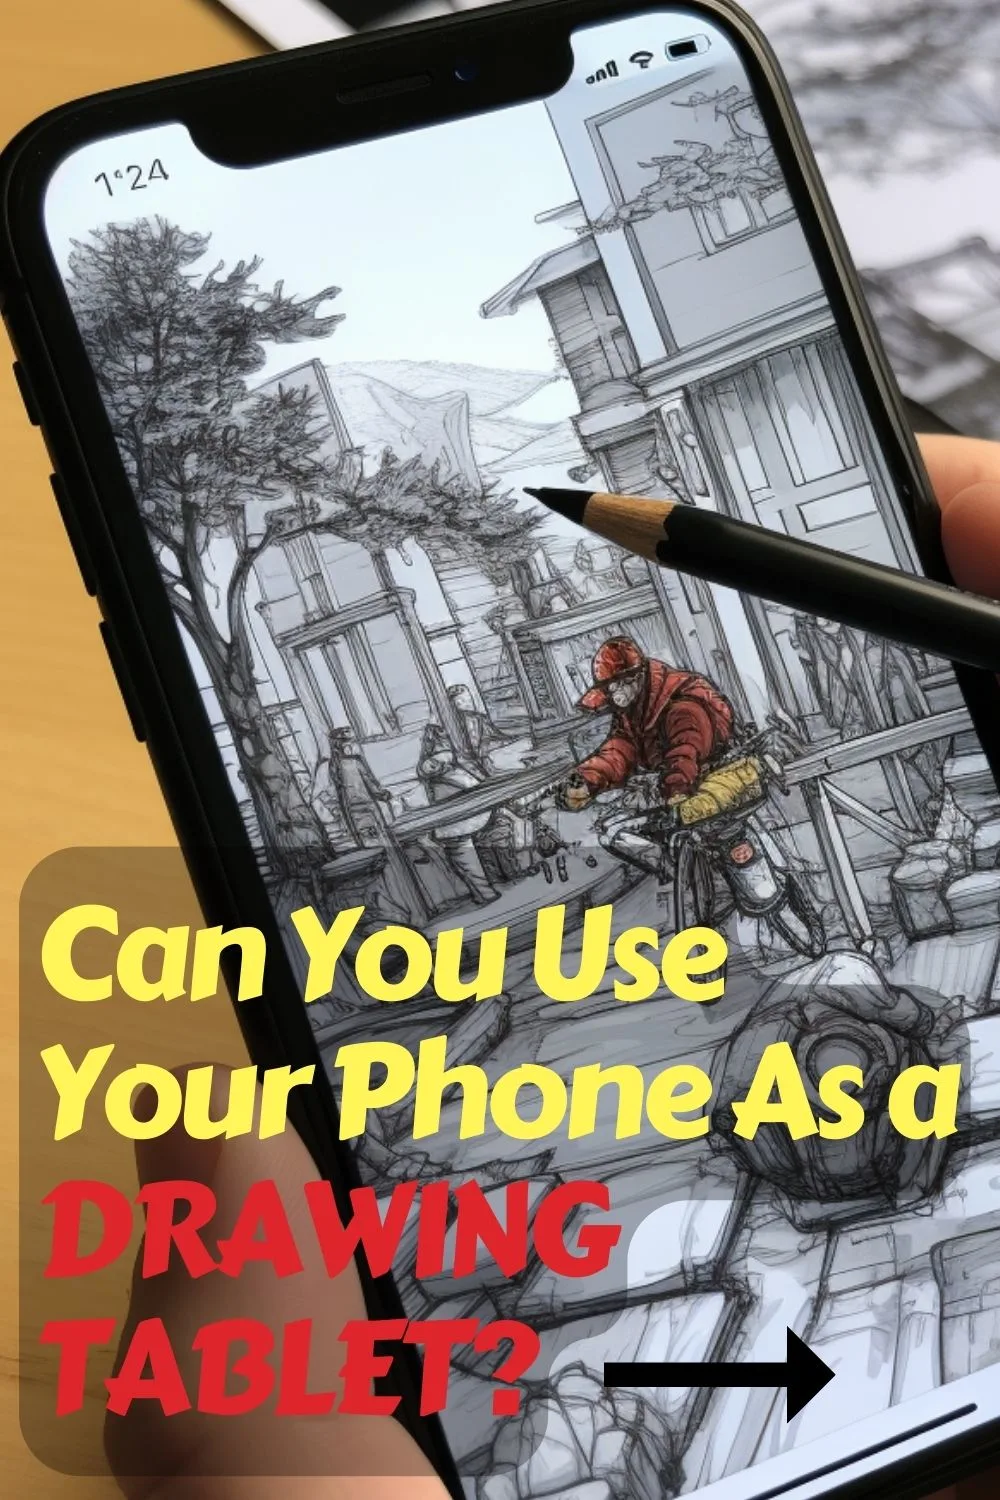 Can you use your phone as a drawing tablet